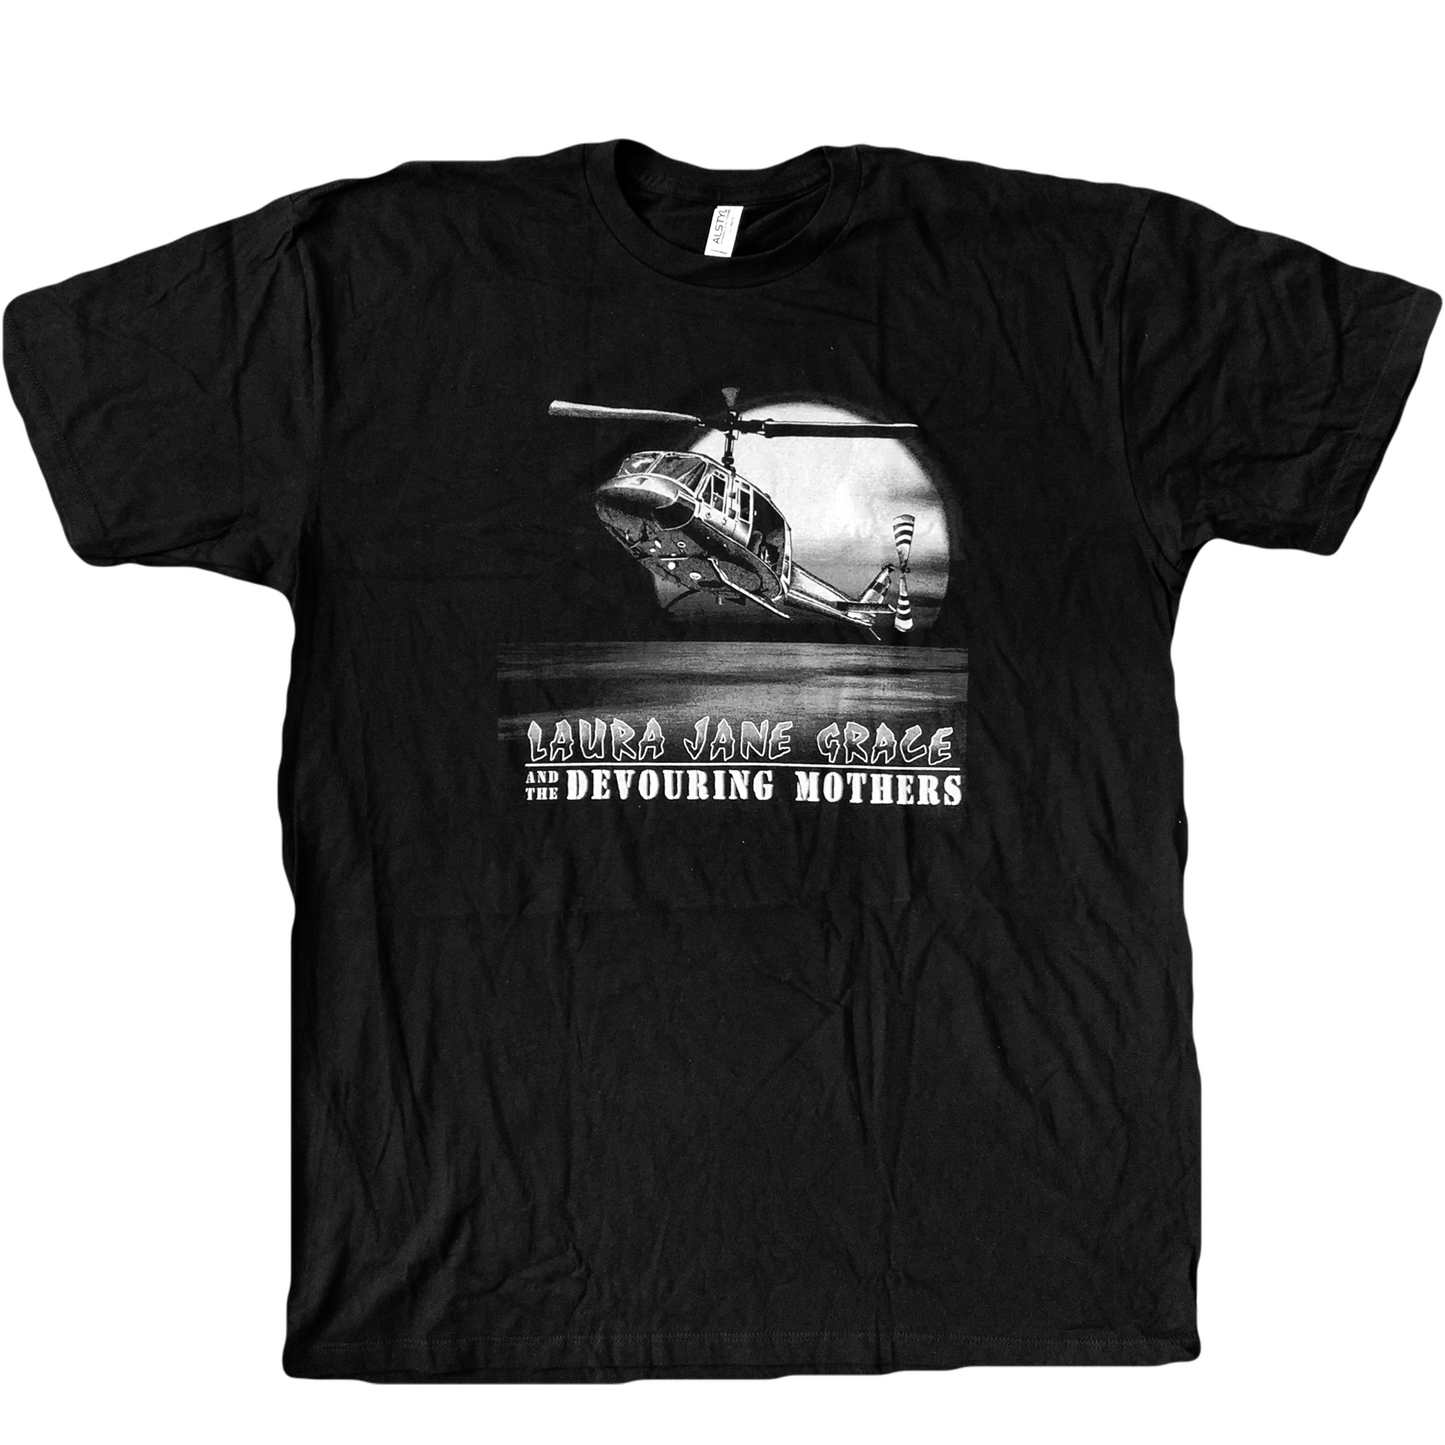 China Beach Helicopter T-Shirt